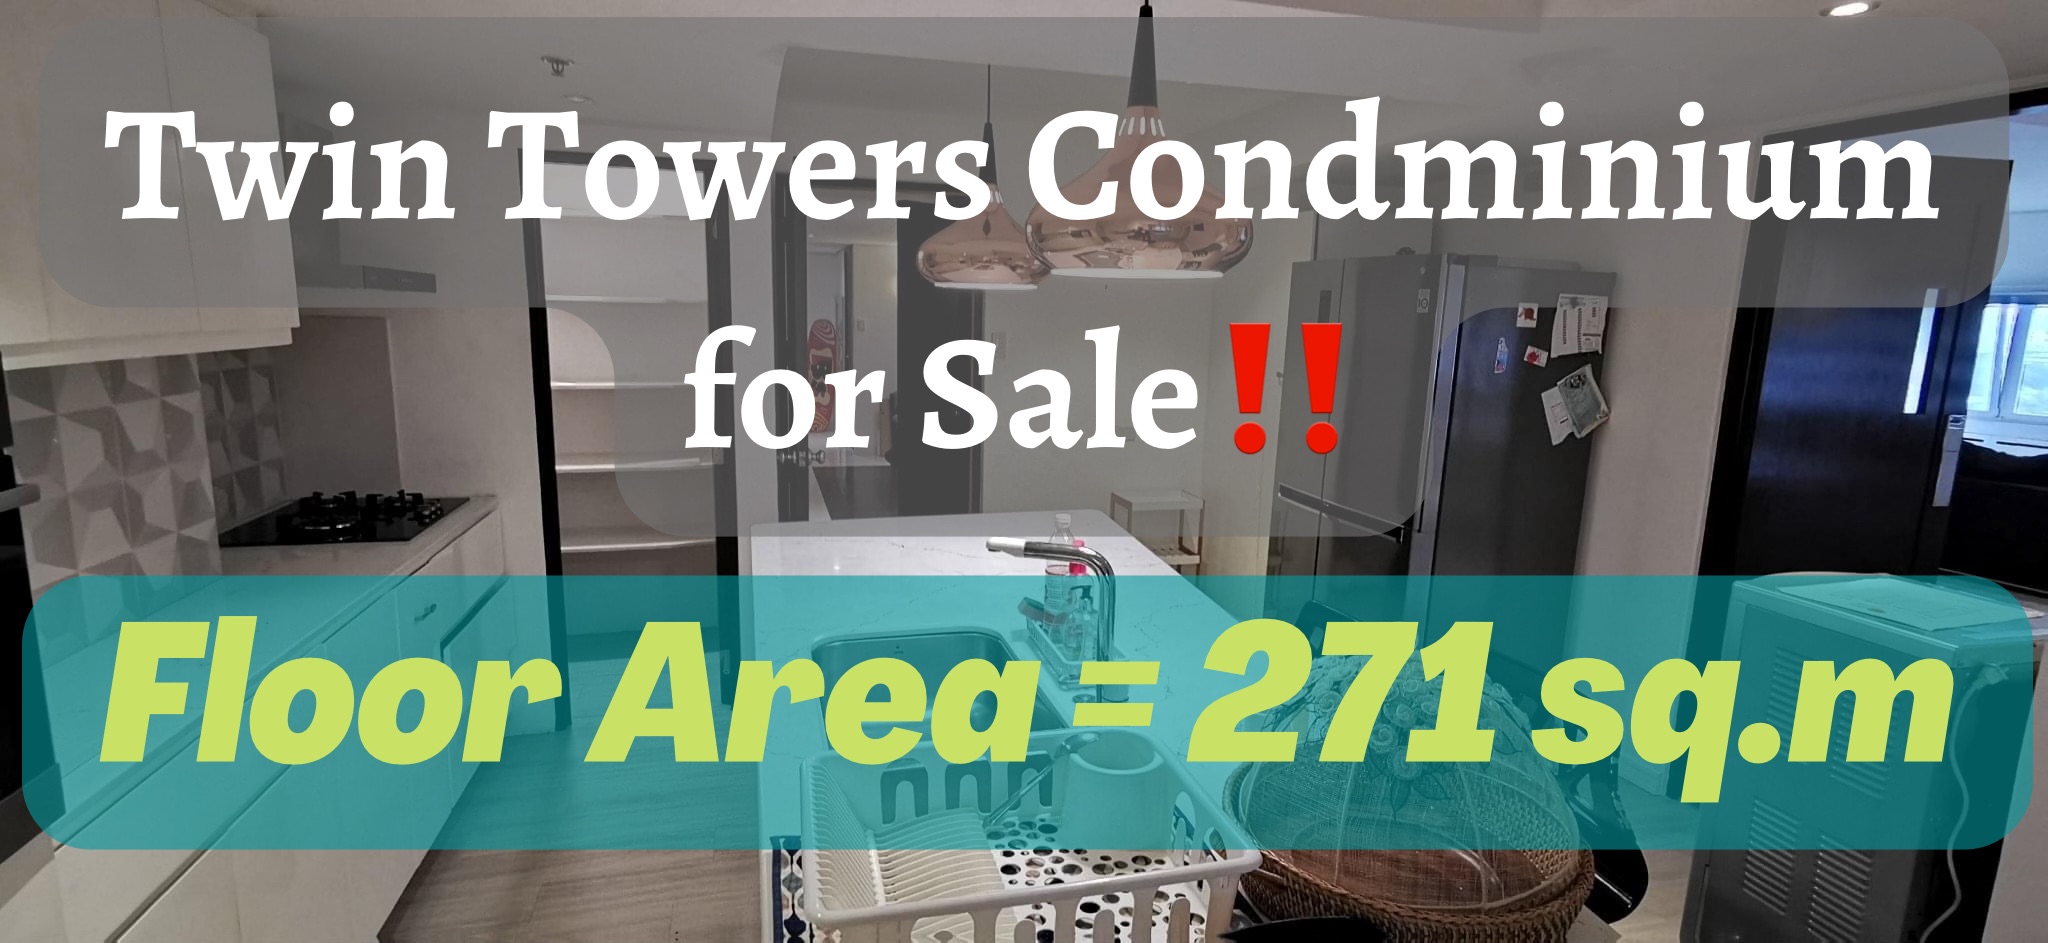 Twin Towers Condominium for Sale‼️